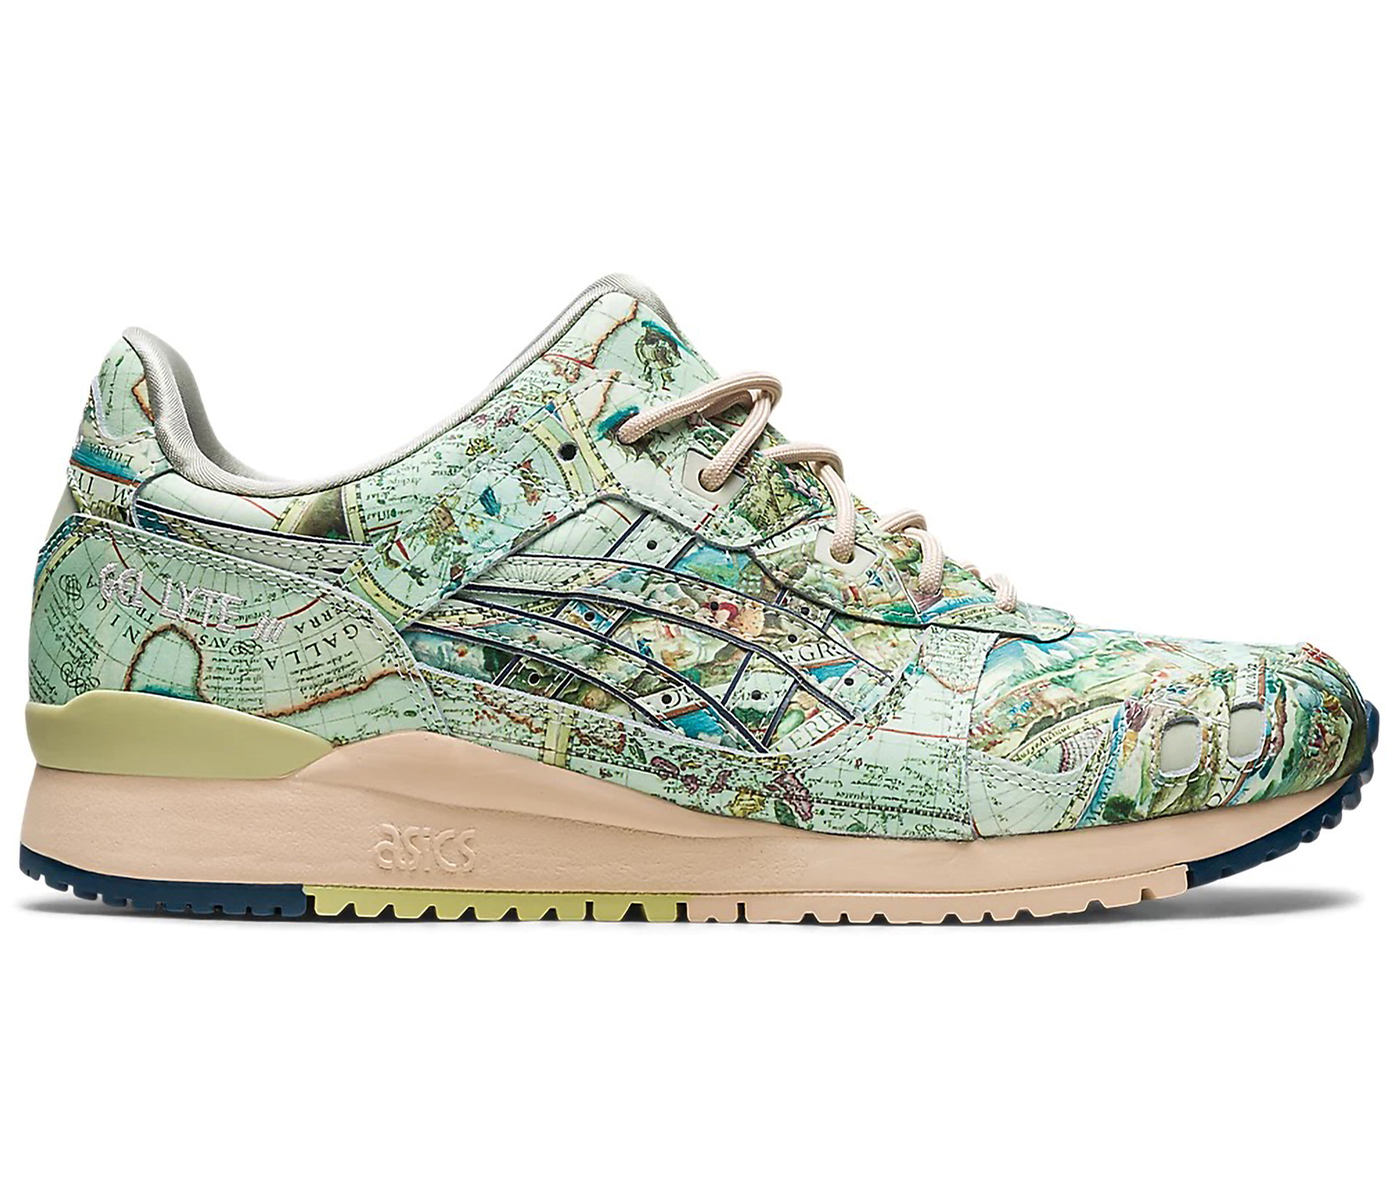 ASICS Gel-Lyte III Sean Wotherspoon x atmos Men's - 1203A019-000 - US